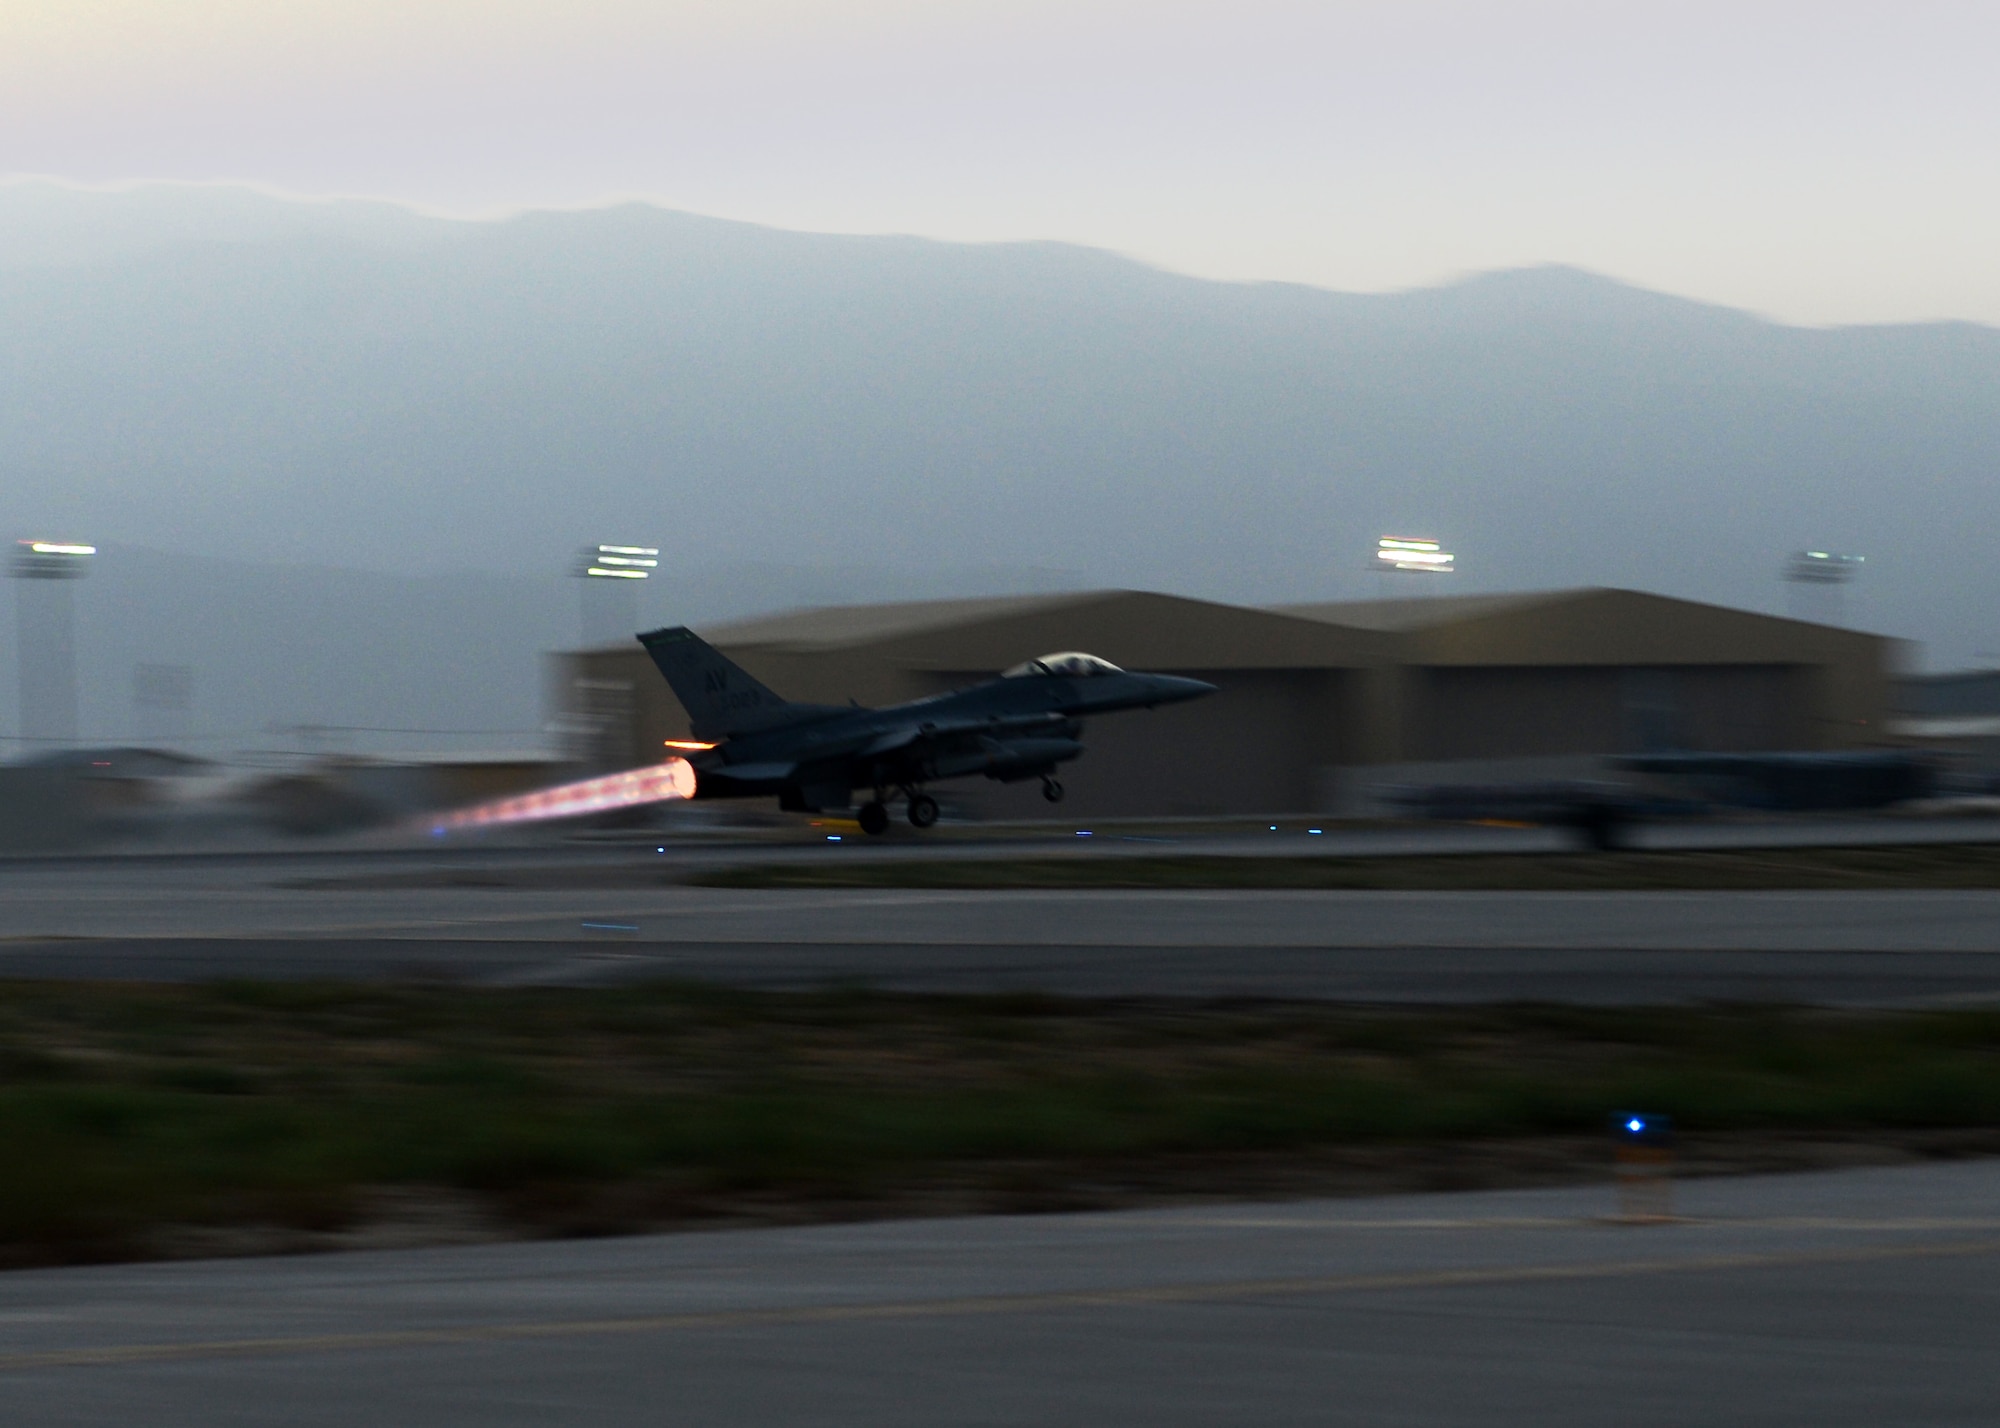 U.S. Air Force Capt. Dakota Olsen, 555th Expeditionary Fighter Squadron F-16 Fighting Falcon pilot, takes off on a combat airpower mission June 17, 2015, at Bagram Airfield, Afghanistan. Olsen’s job is to provide close air support and armed over watch for military personnel in Afghanistan. He flies various sorties and missions throughout the country on a daily basis providing airpower to ensure a safe and secure environment for personnel at BAF. (U.S. Air Force photo by Senior Airman Cierra Presentado/Released)